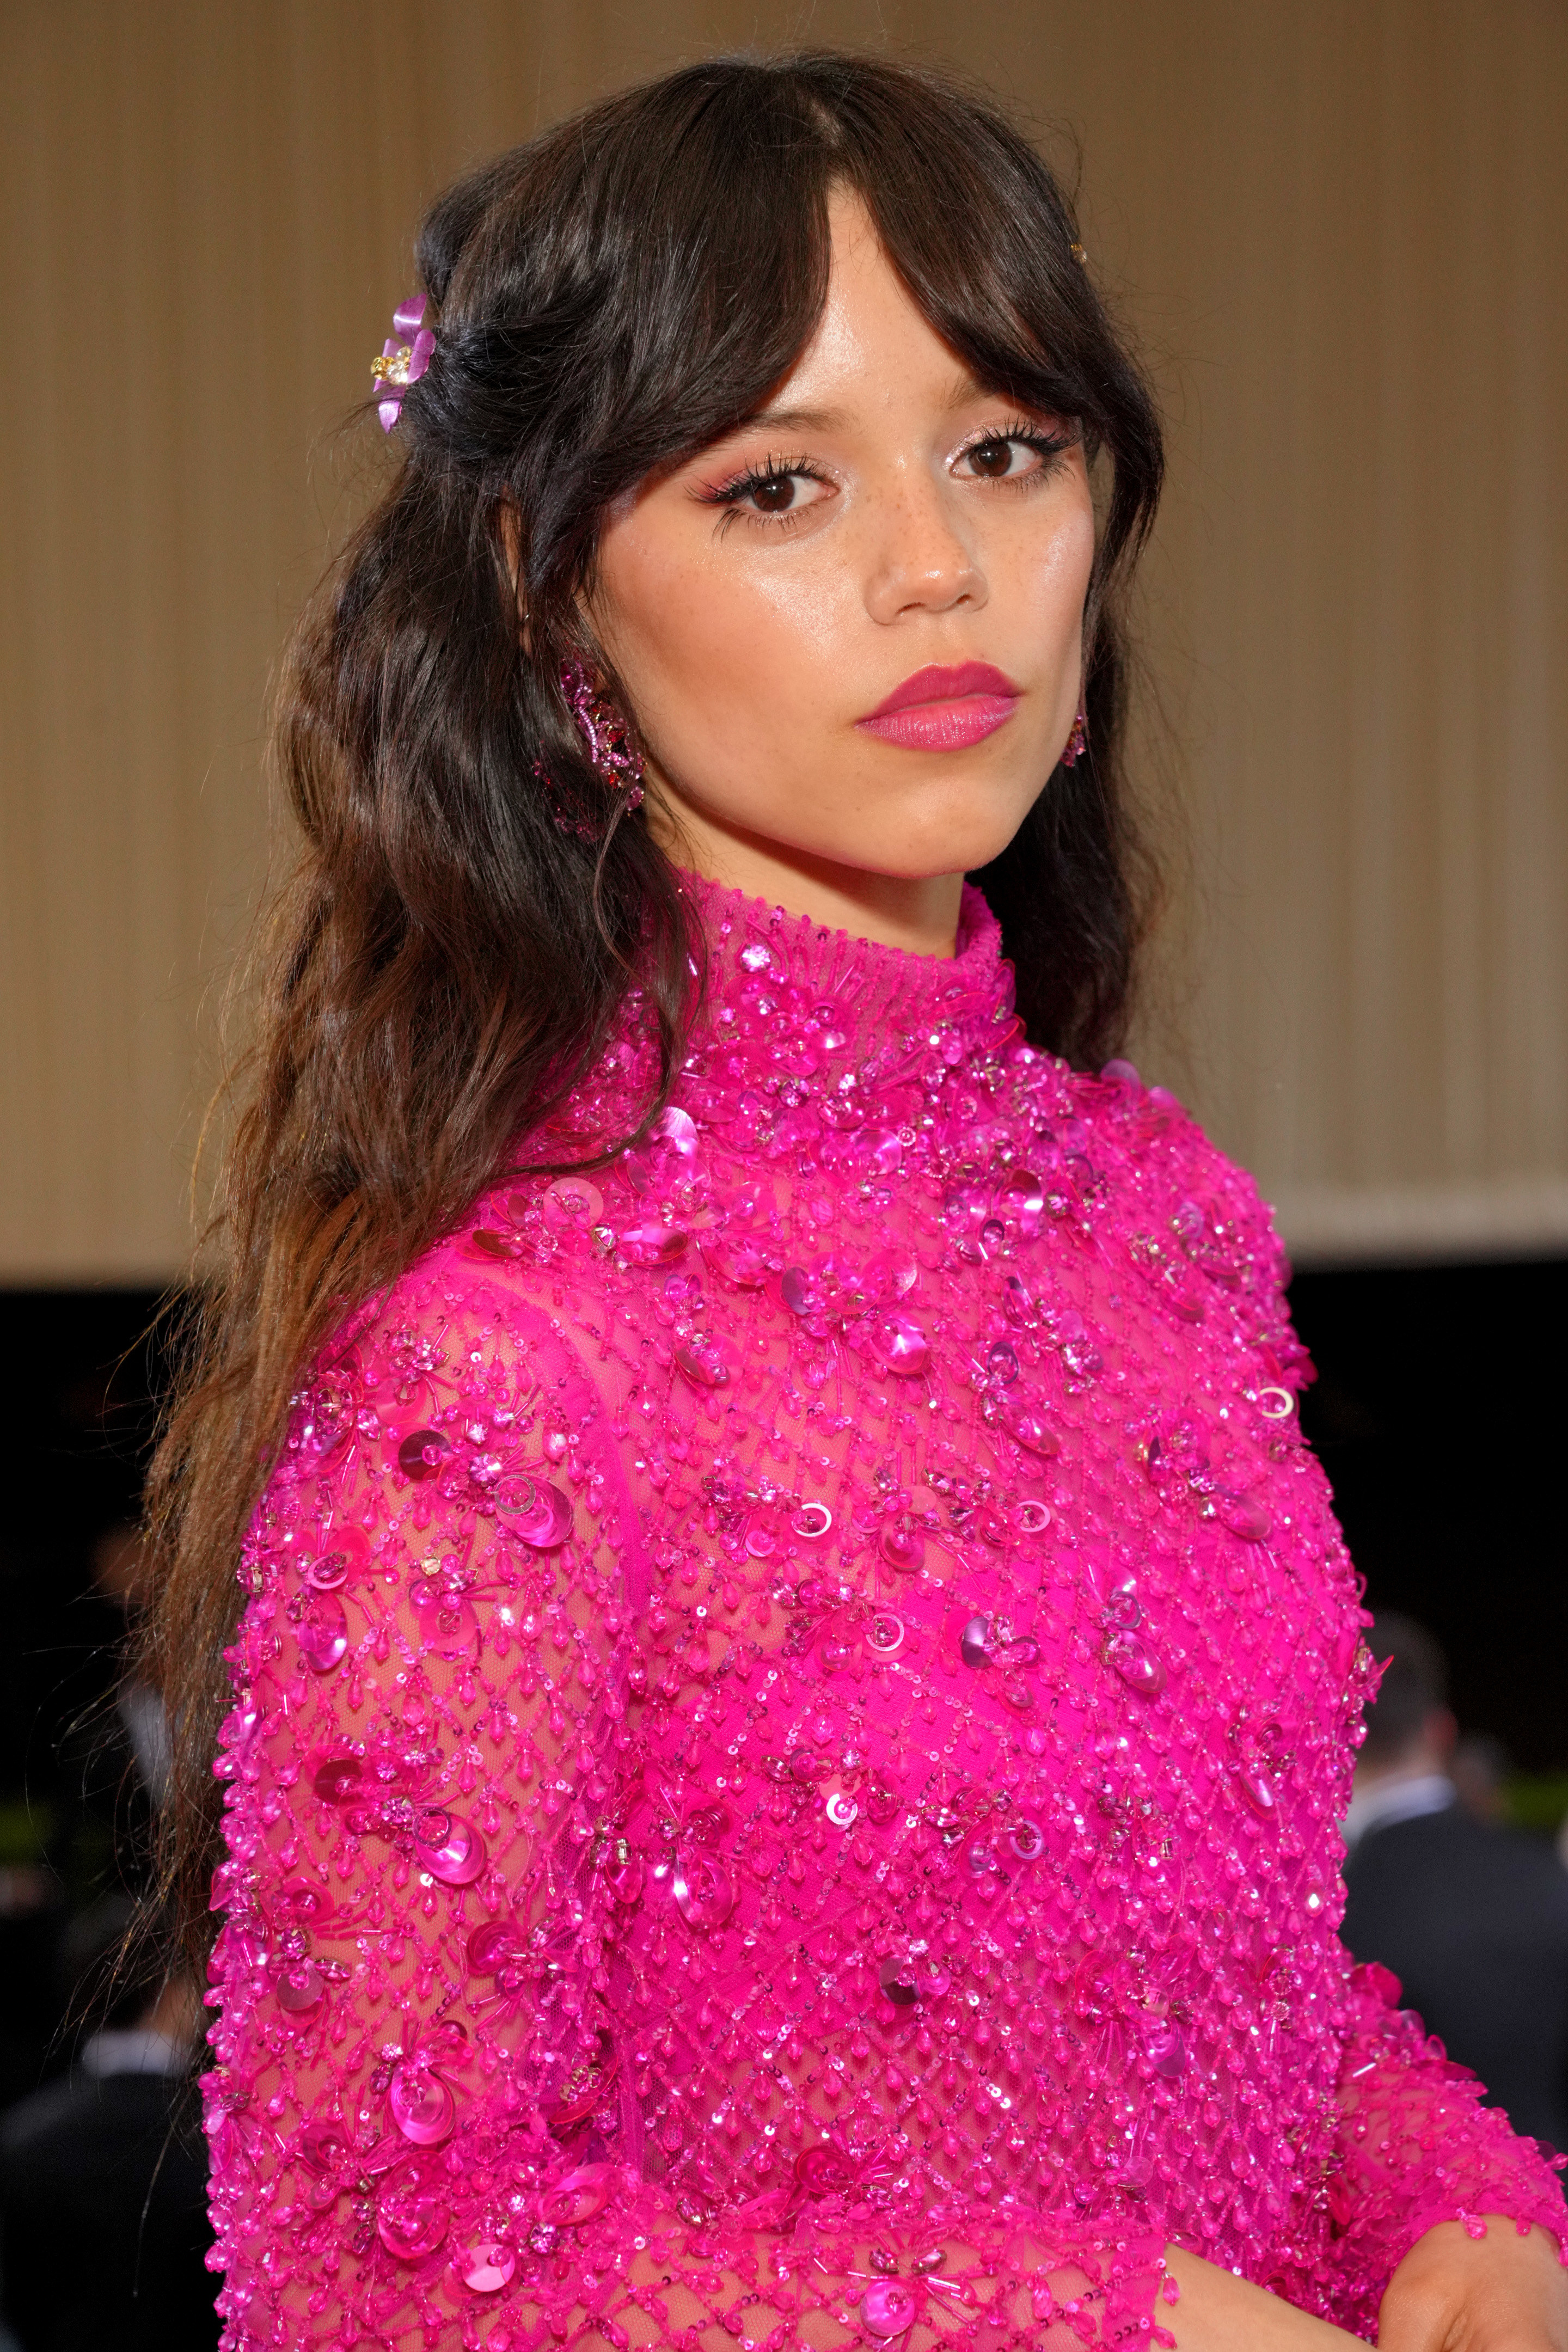 Jenna Ortega Pays Homage to Wednesday Addams In Macabre Versace